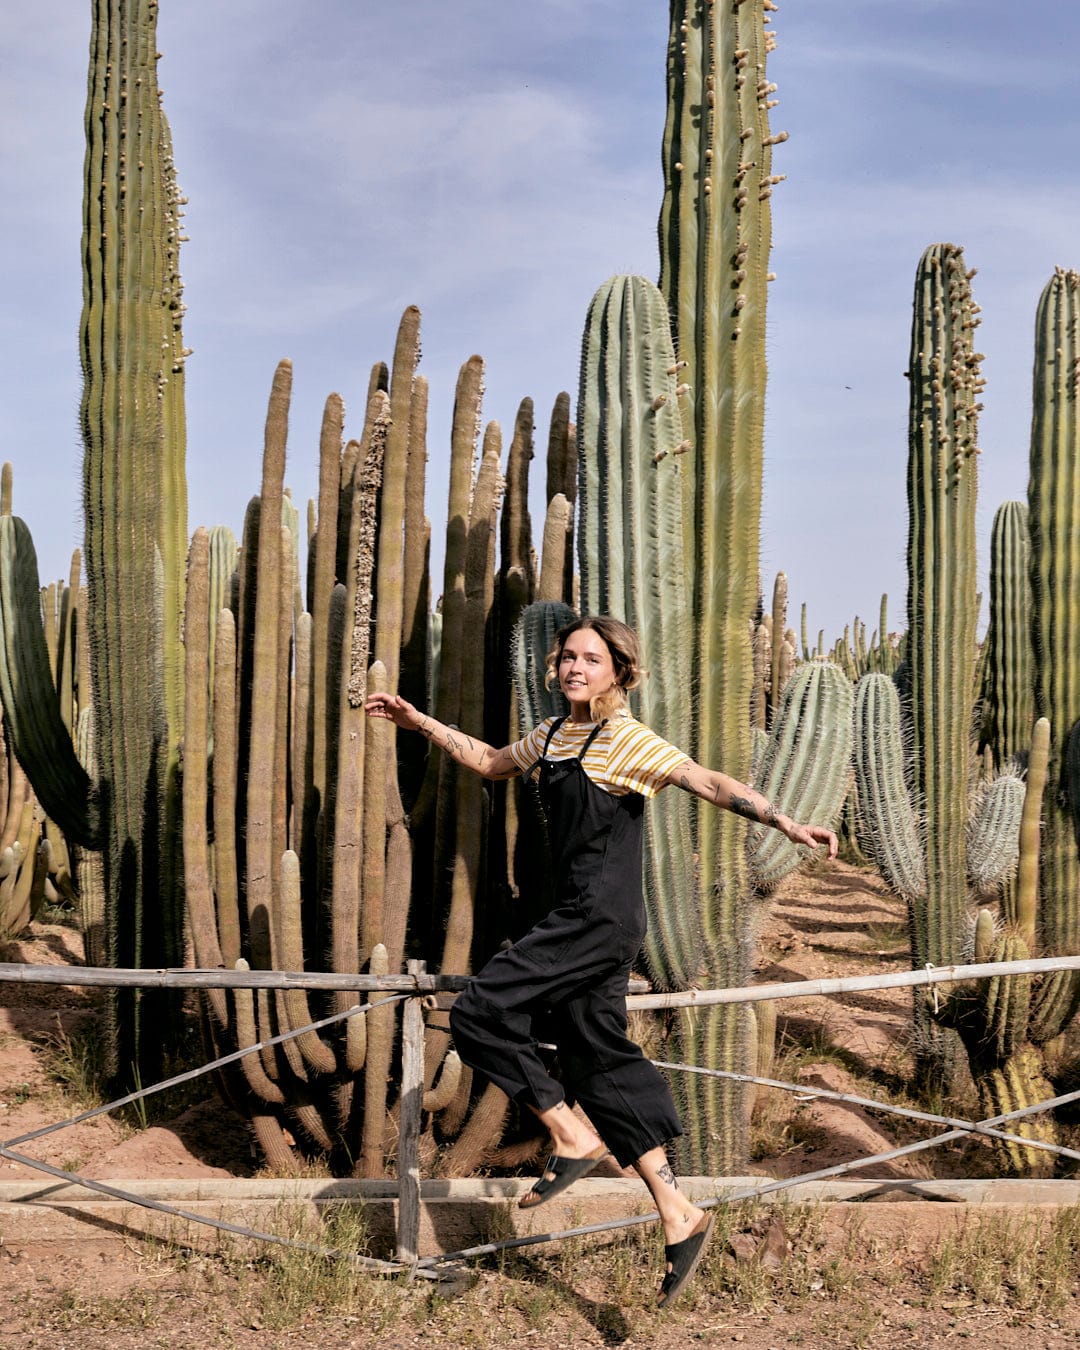 A person in a striped shirt and Saltrock Nancy - Womens Dungarees - Dark Grey with adjustable tie straps poses cheerfully amidst tall cacti, balancing on a wooden fence in a desert-like environment.